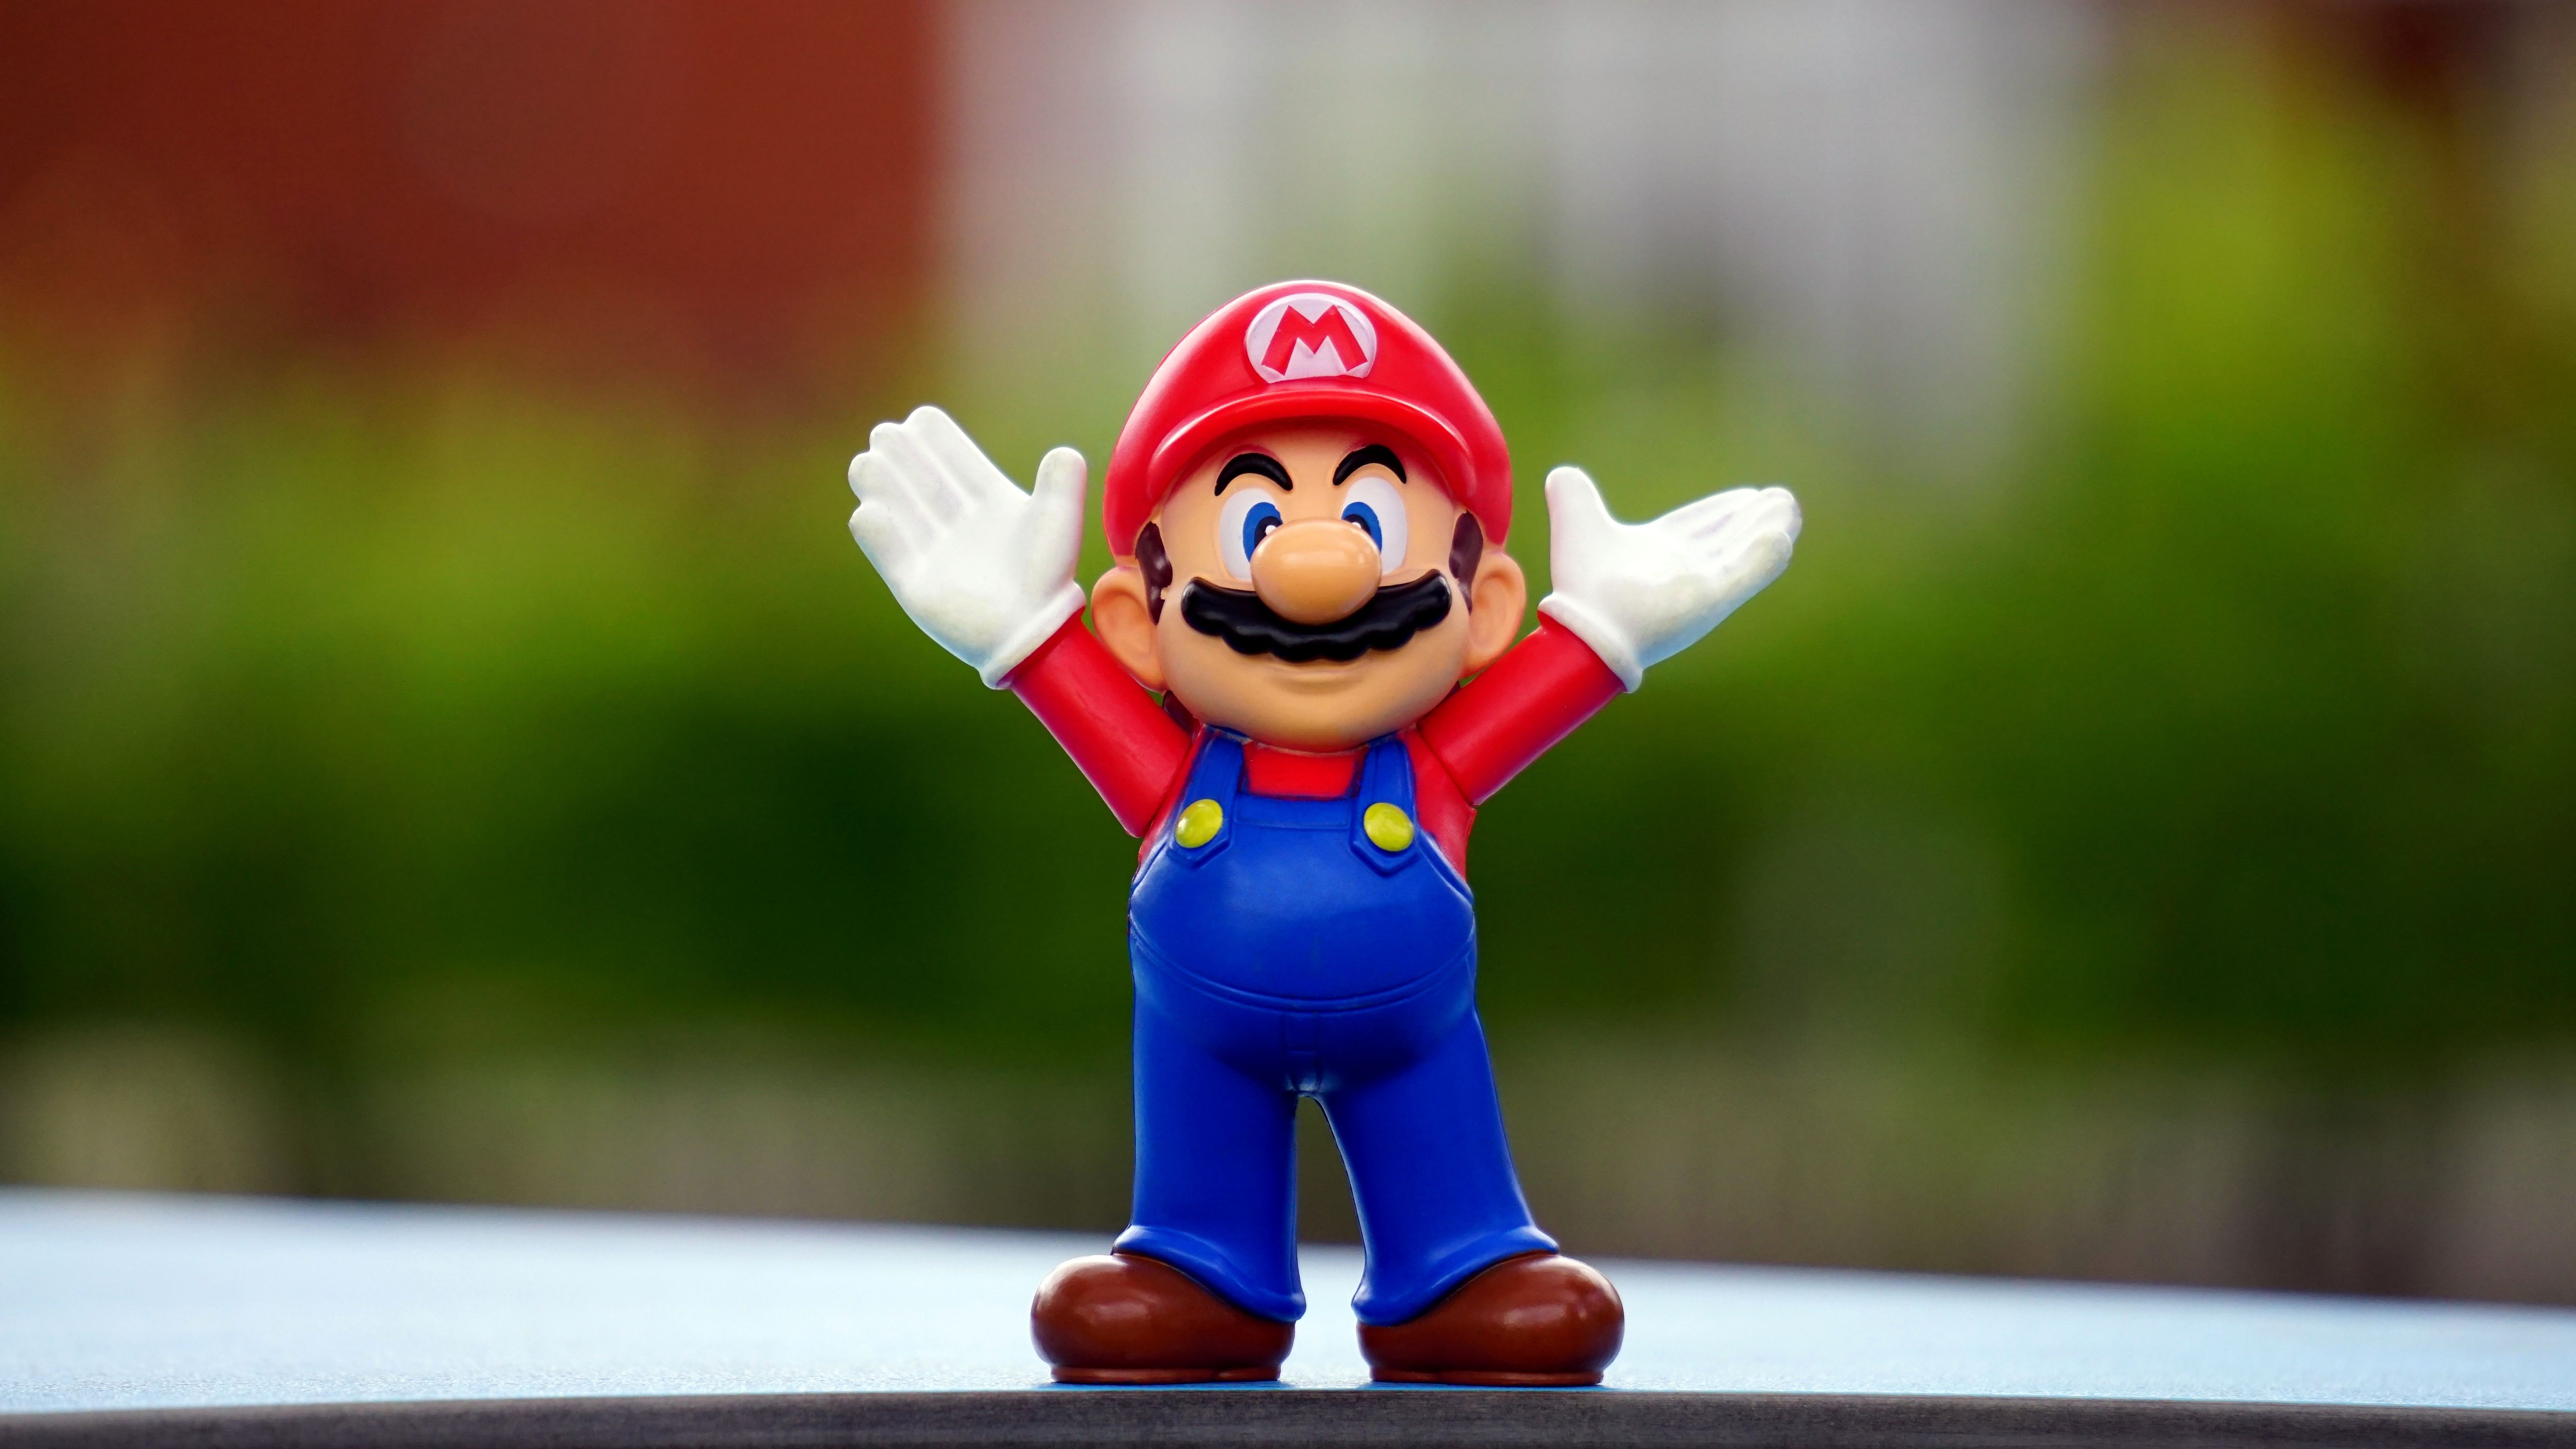 Wallpaper Mario, Action figure, 5K, Photography / Editor's Picks,. Wallpaper for iPhone, Android, Mobile and Desktop